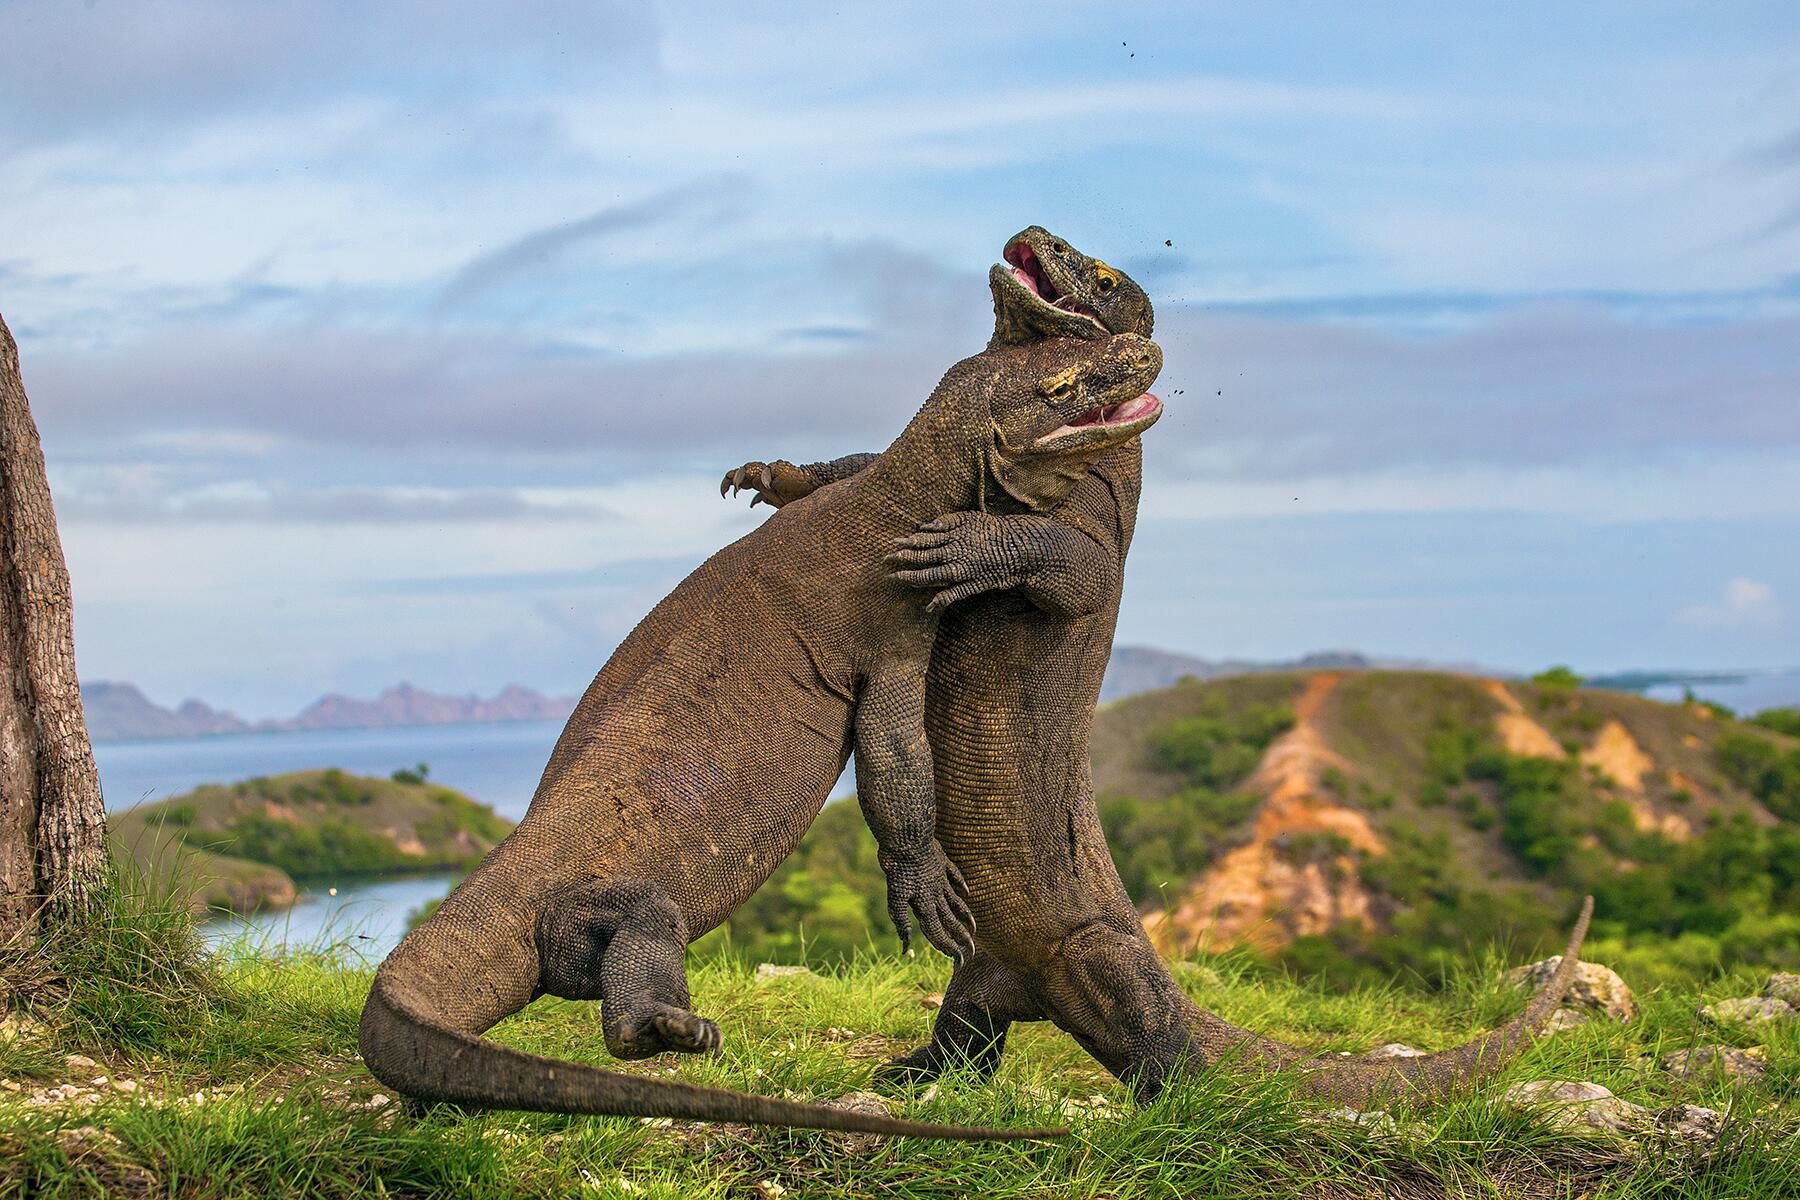 <a href='https://www.fodors.com/world/asia/indonesia/experiences/news/photos/12-alternative-destinations-to-bali-indonesia#'>From &quot;Bali's Overcrowded. We Recommend These 12 Destinations Instead: Komodo National Park   &quot;</a>